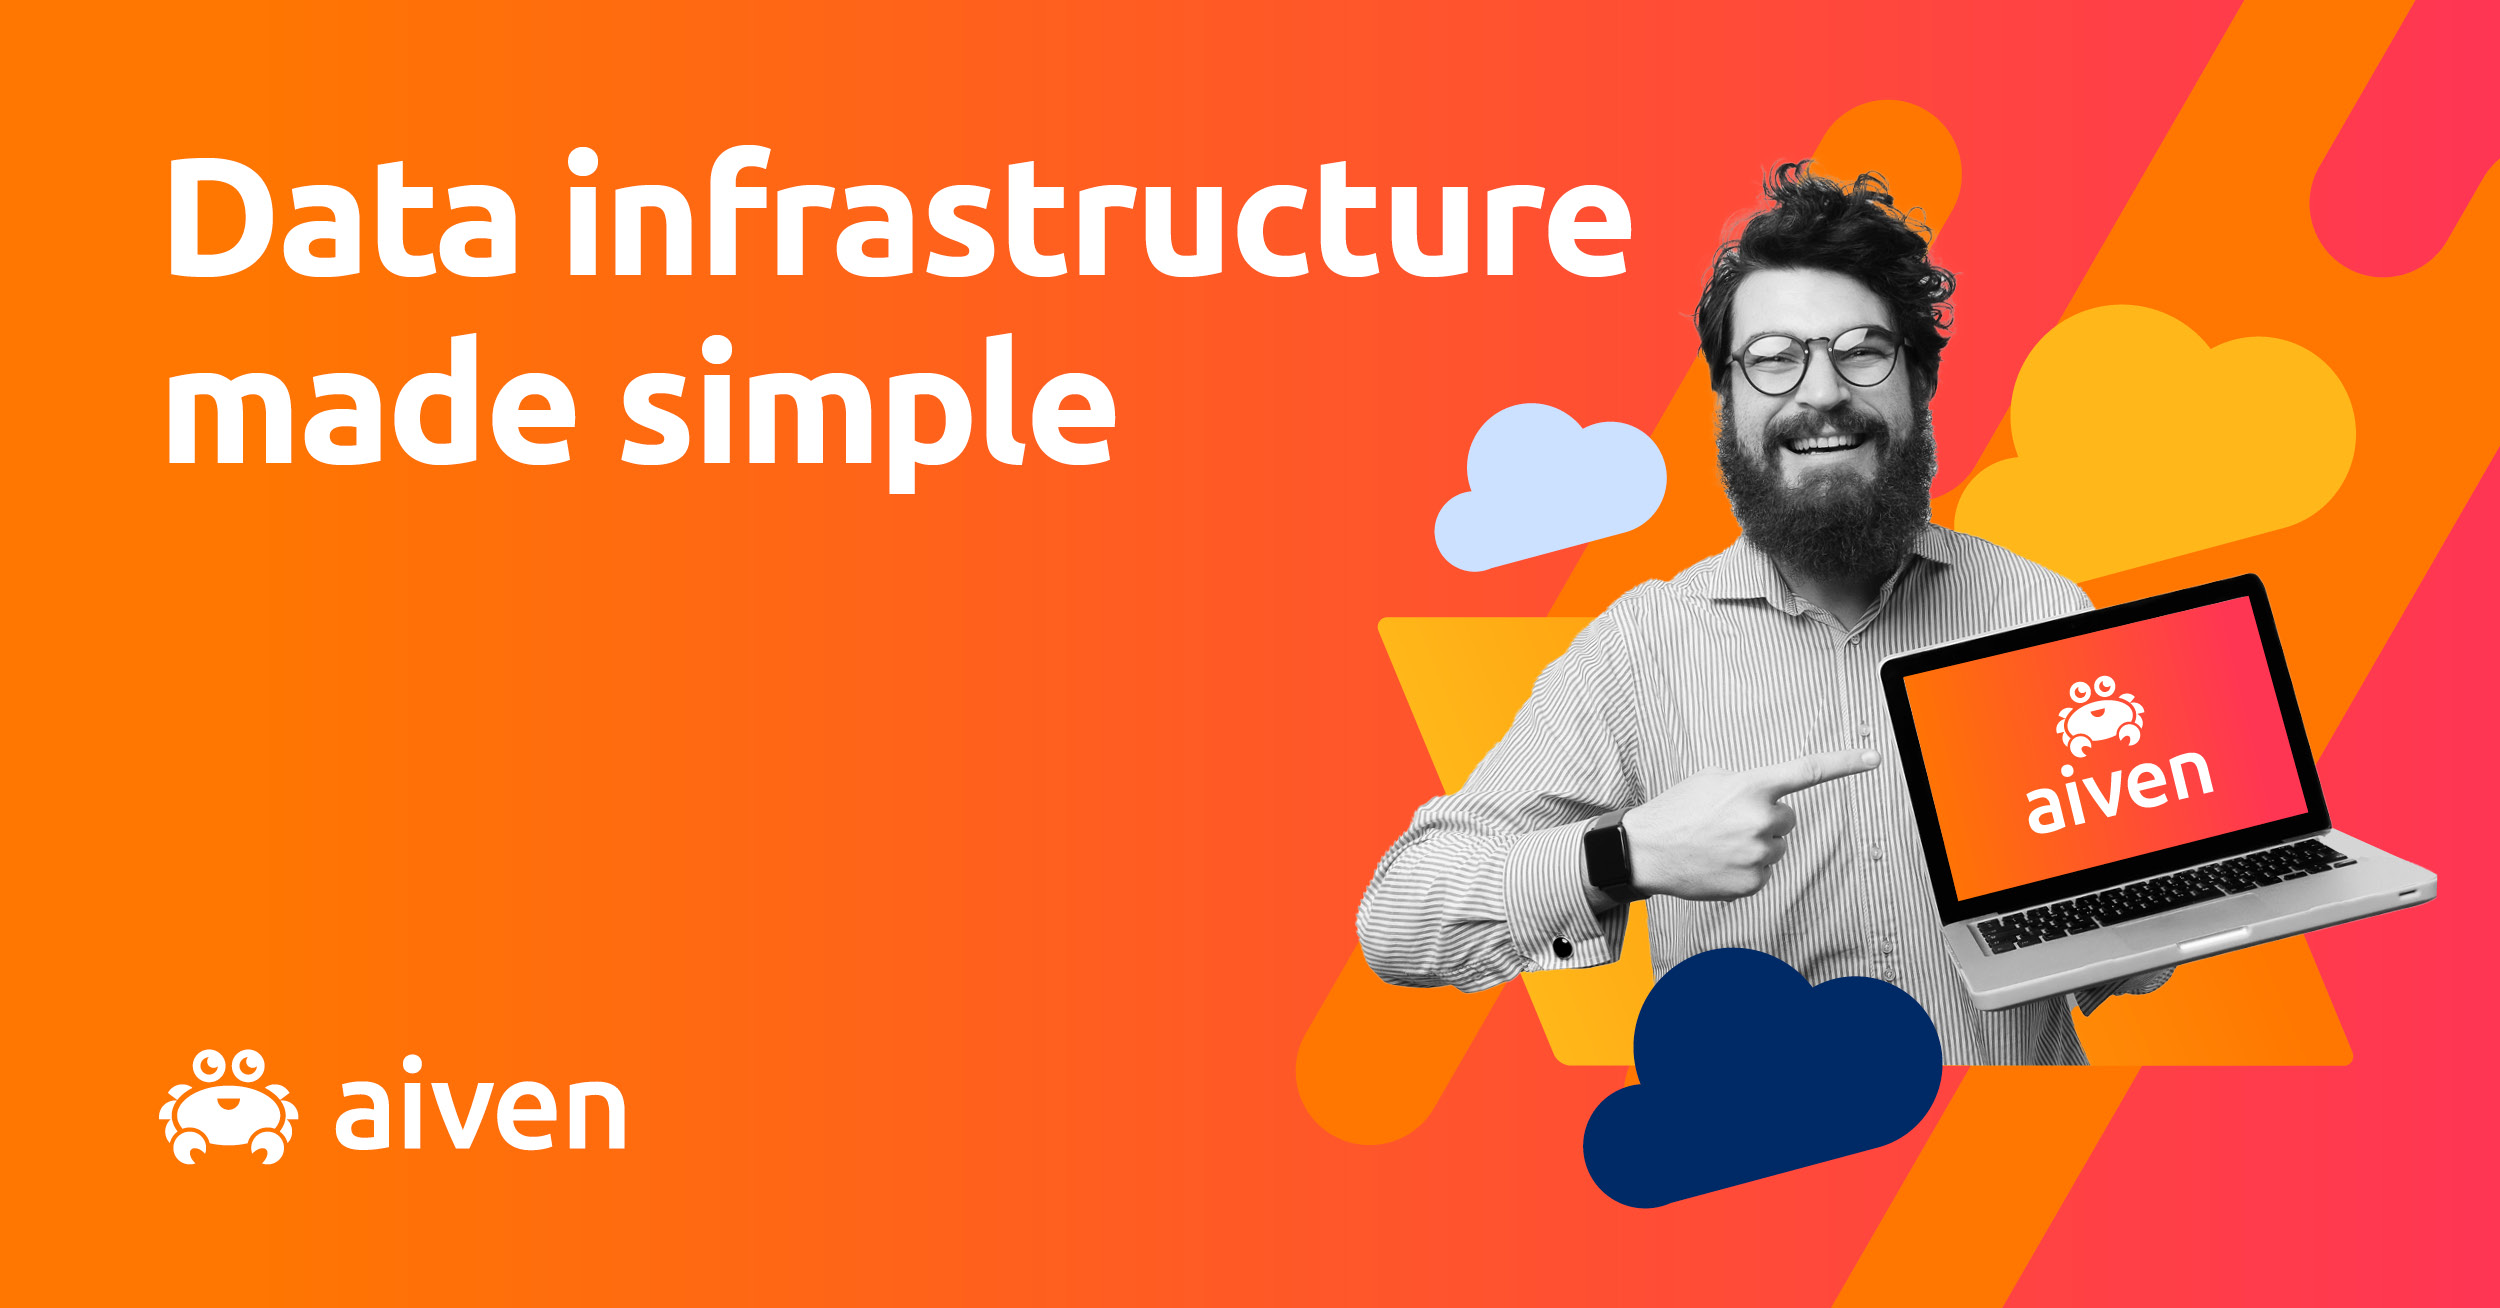 Aiven - Data infrastructure made simple